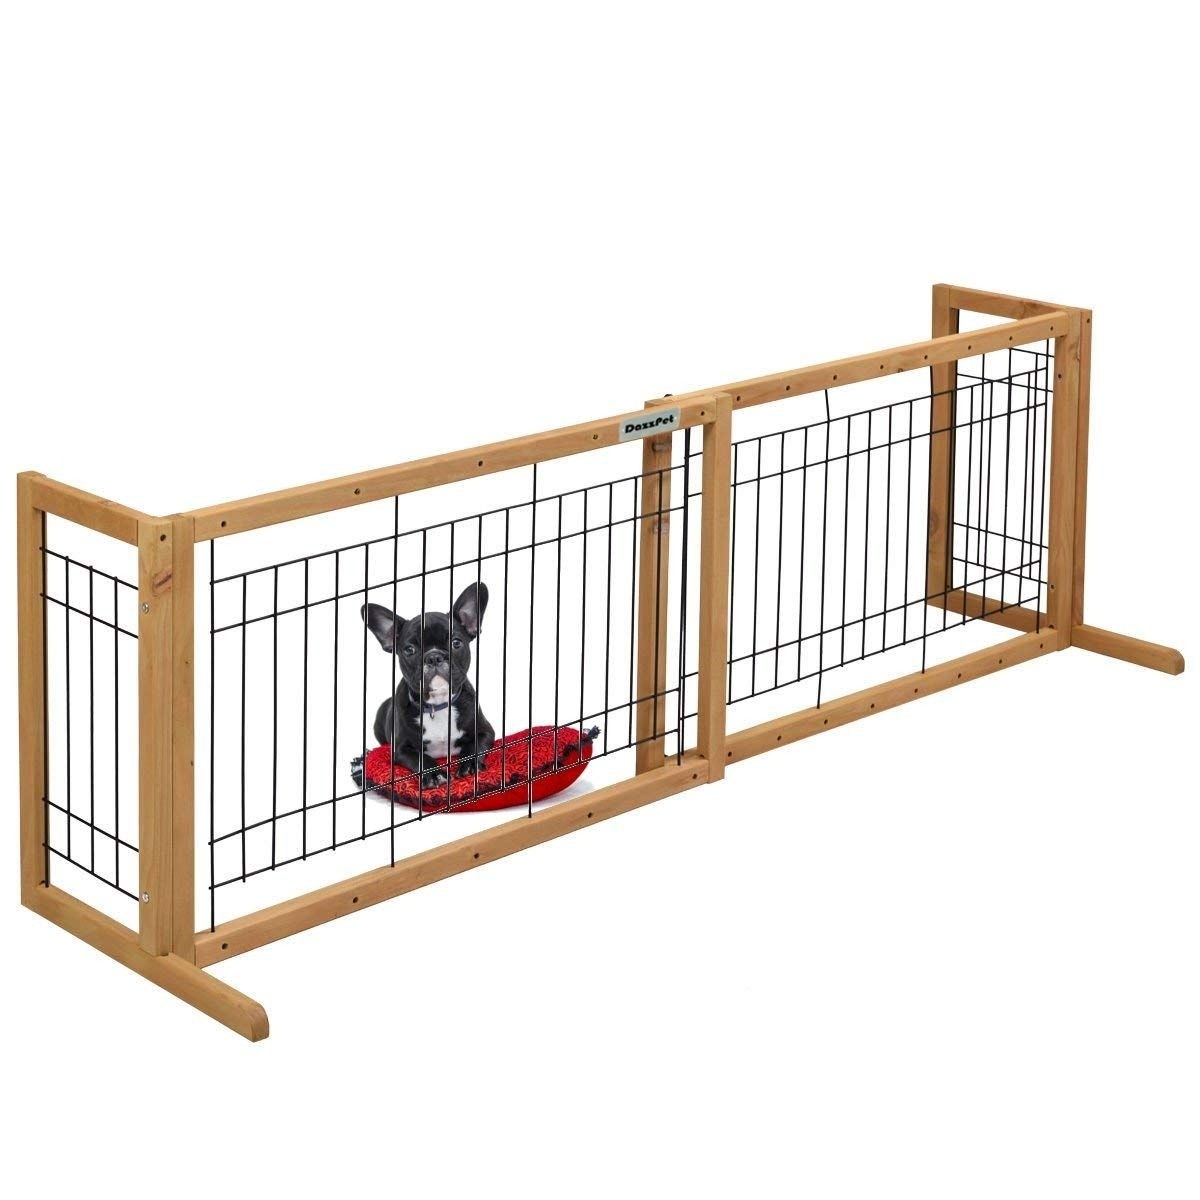 Dazzpet free standing pet gates extra wide indoor small